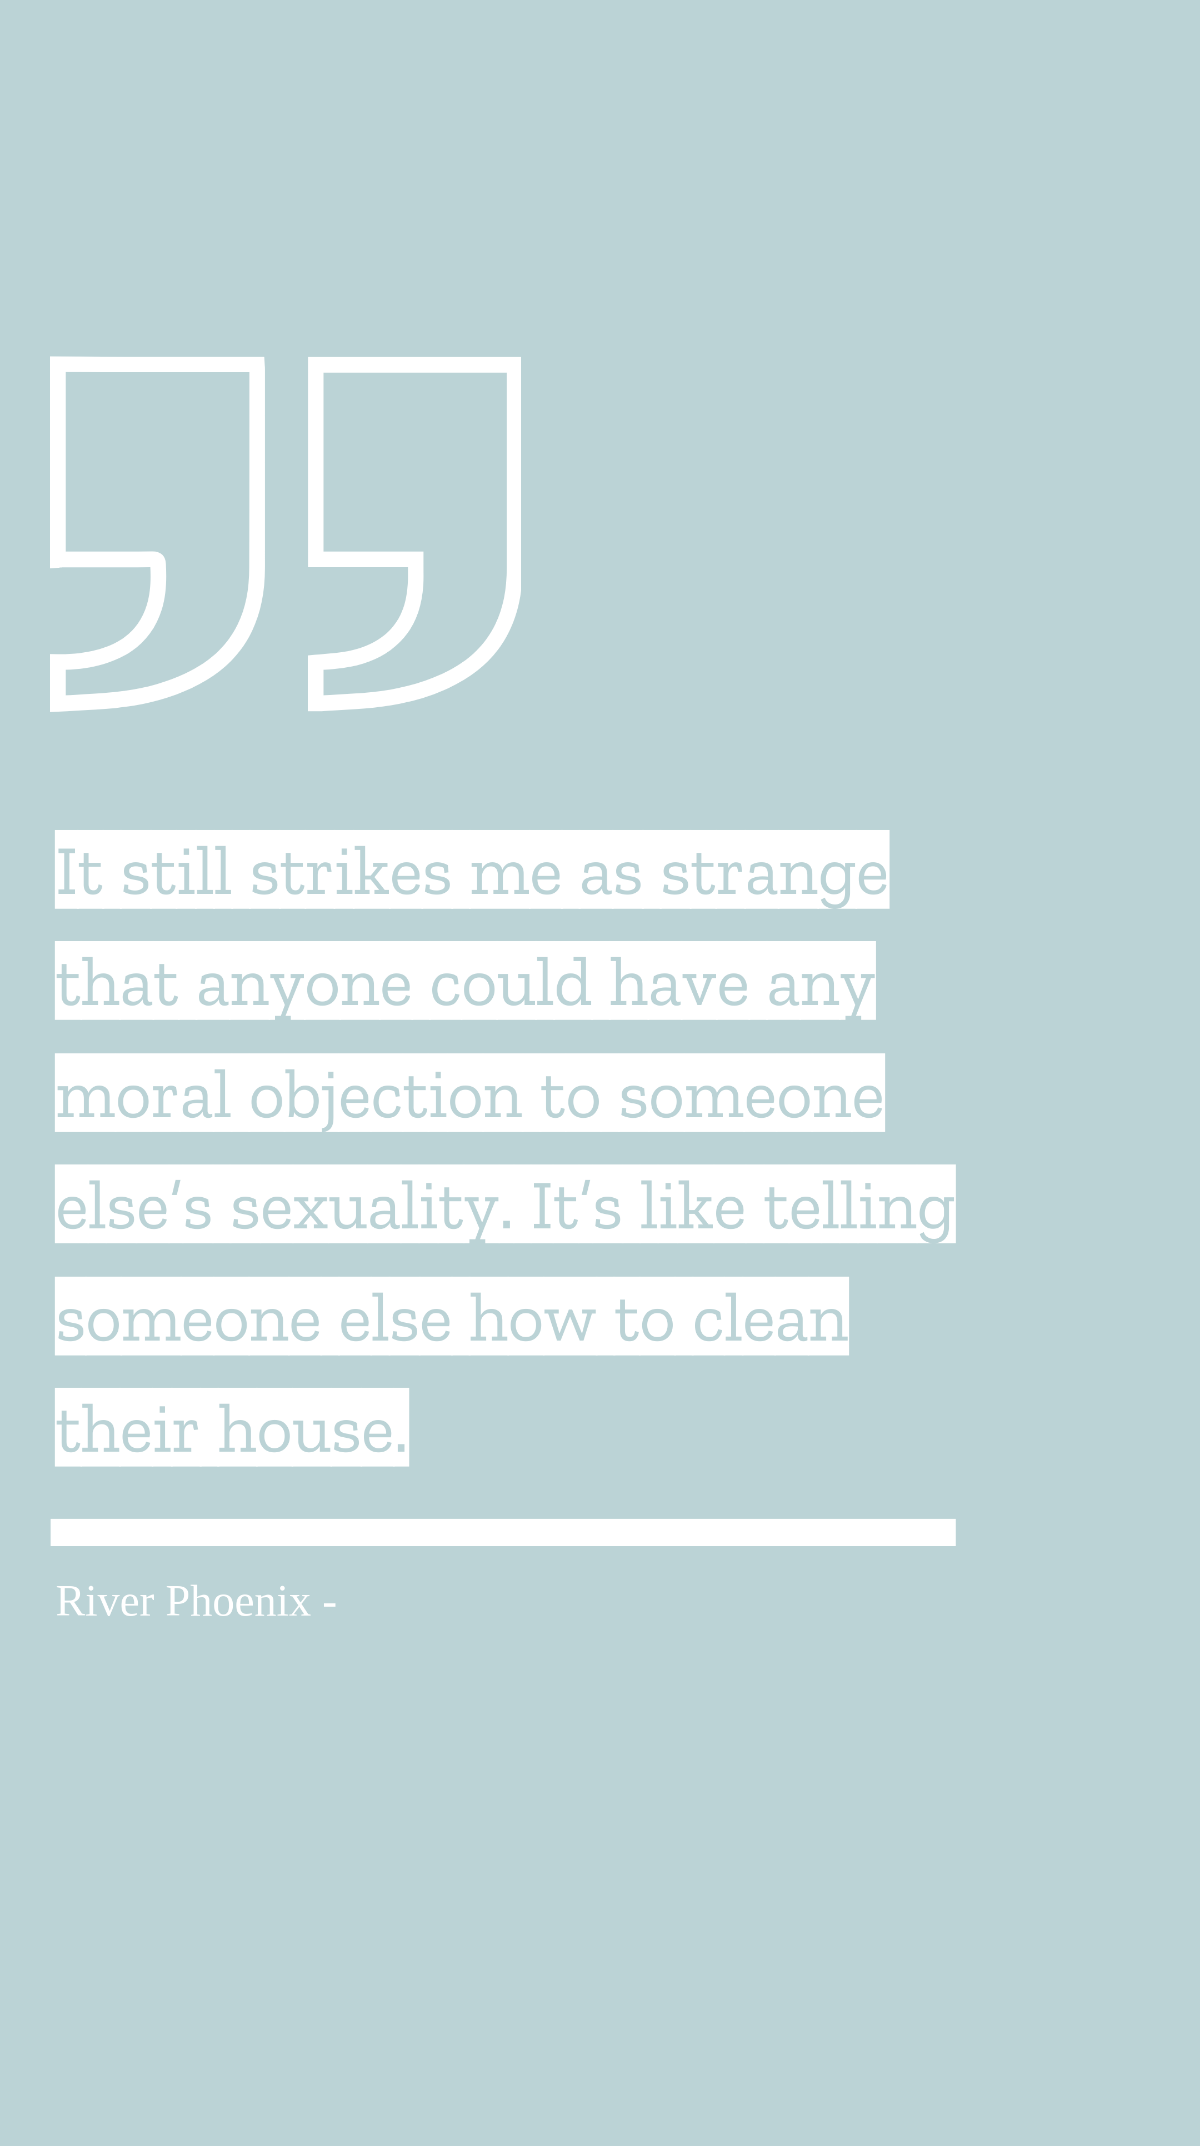 River Phoenix - It still strikes me as strange that anyone could have any moral objection to someone else’s sexuality. It’s like telling someone else how to clean their house. Template